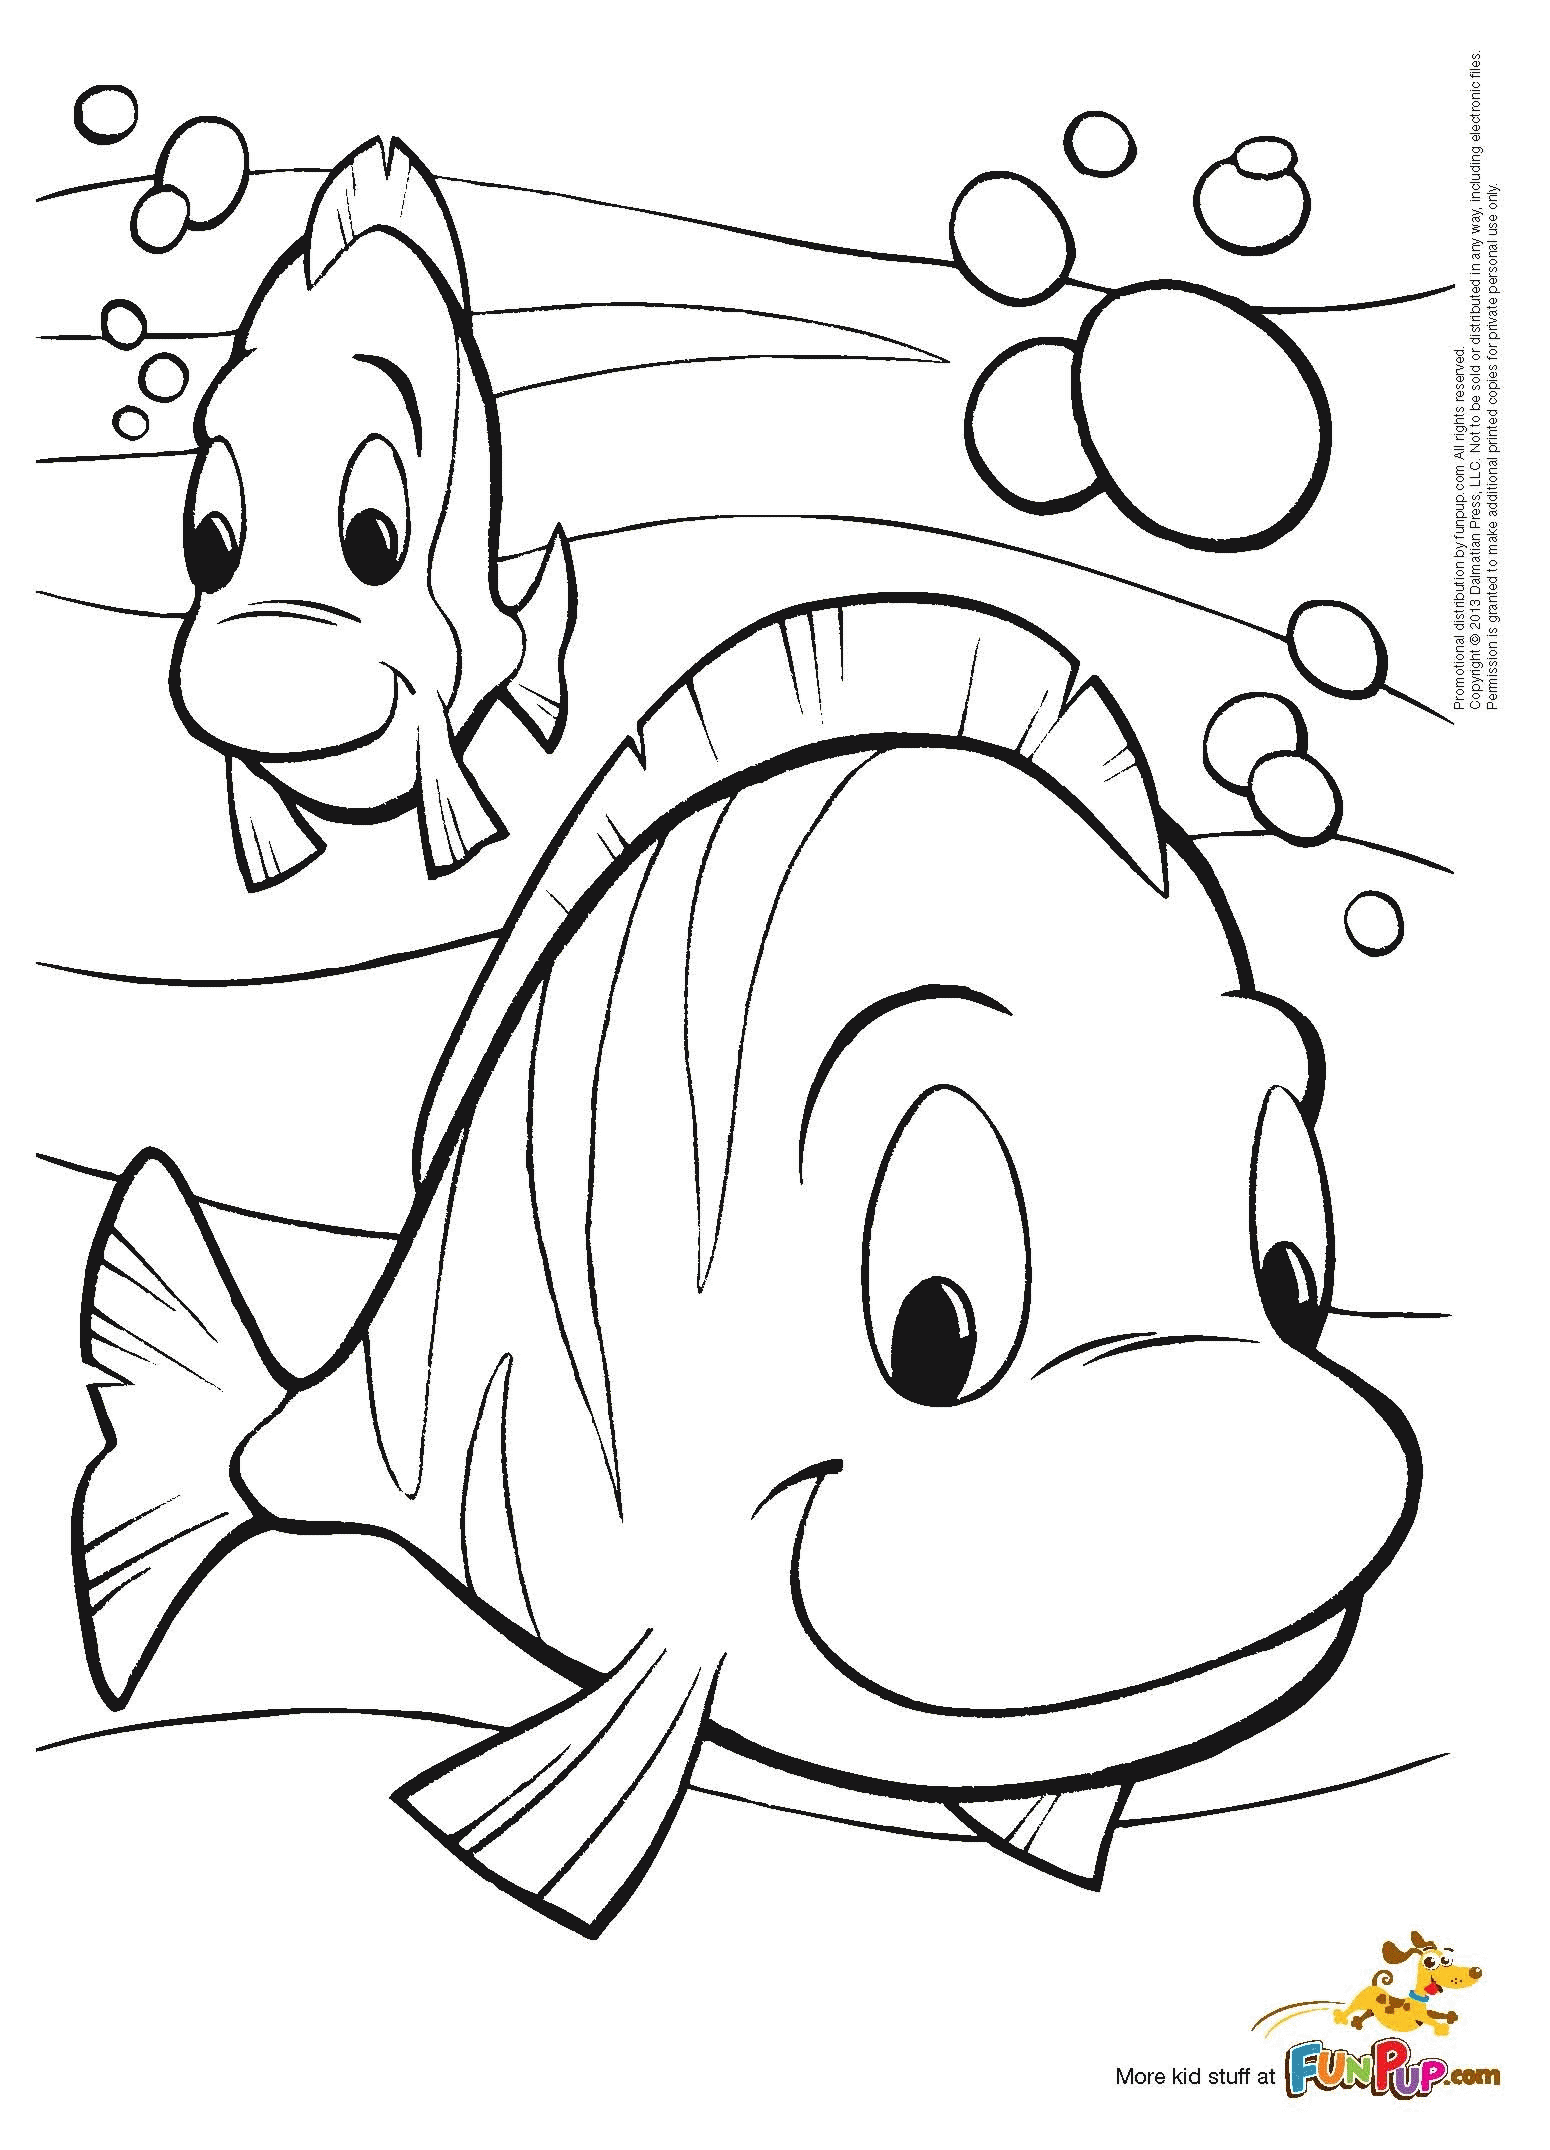 hueyphotos3-june-coloring-pages